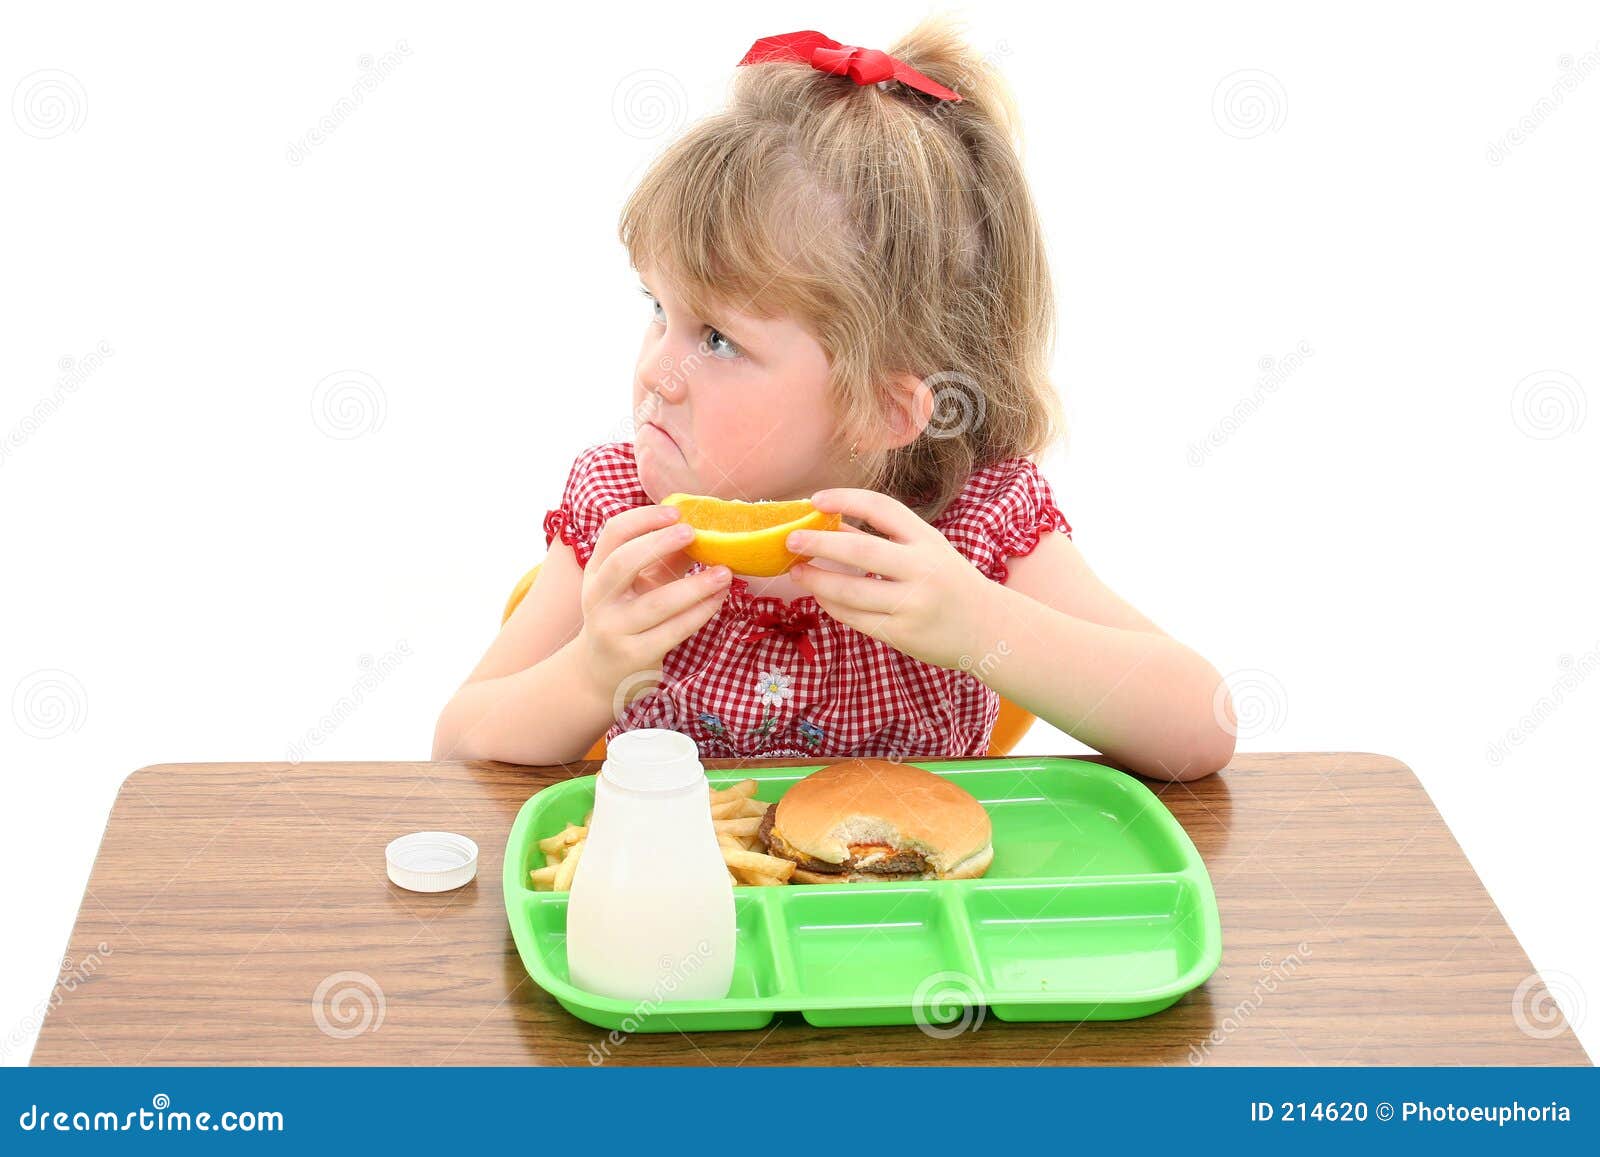 adorable little girl unhappy with school lunch